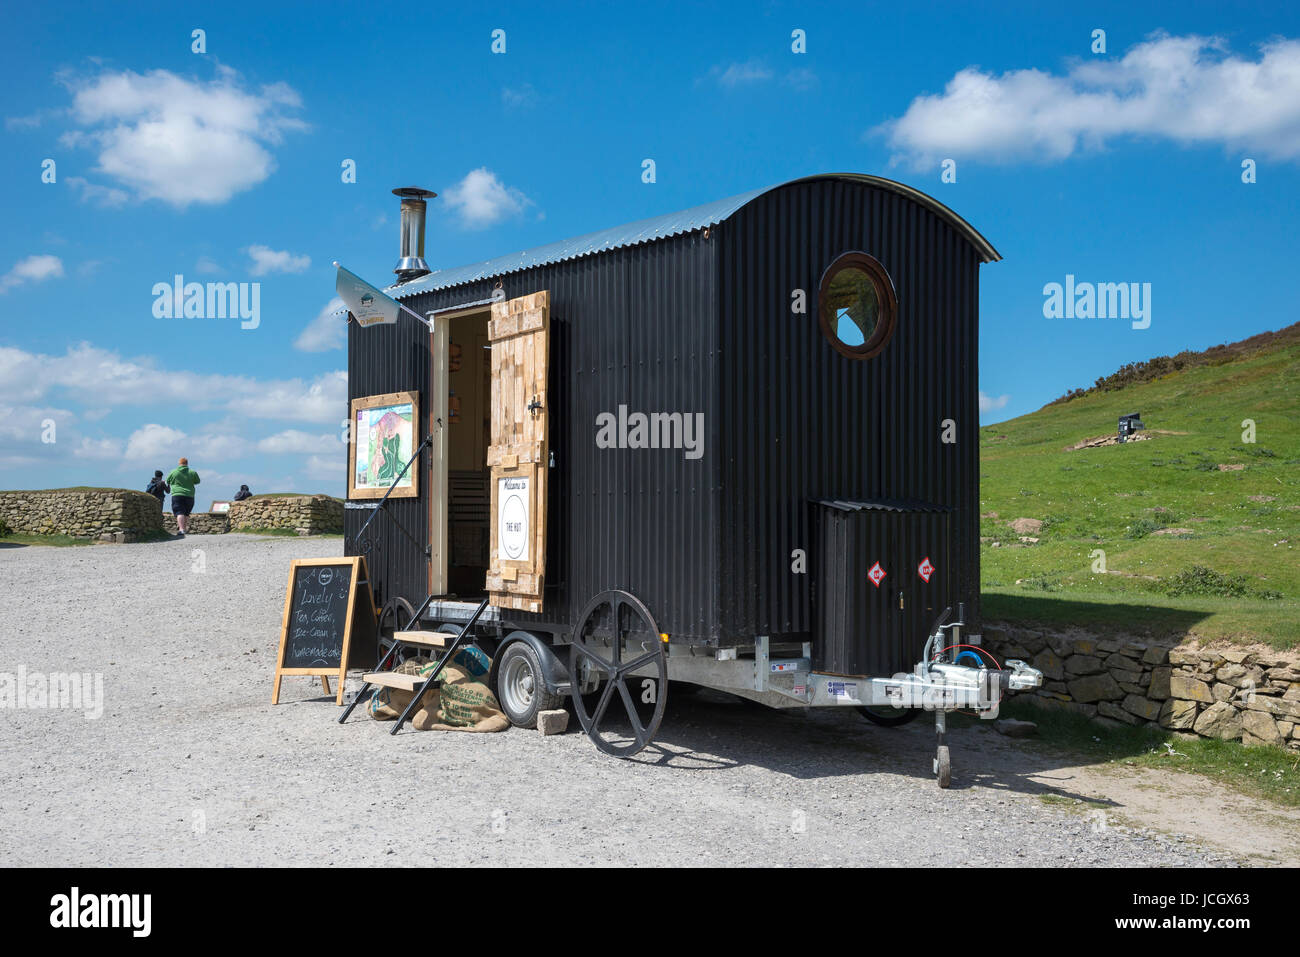 Black hut used as a cafe in the car park at Moel Famau country park, North Wales, UK. Stock Photo